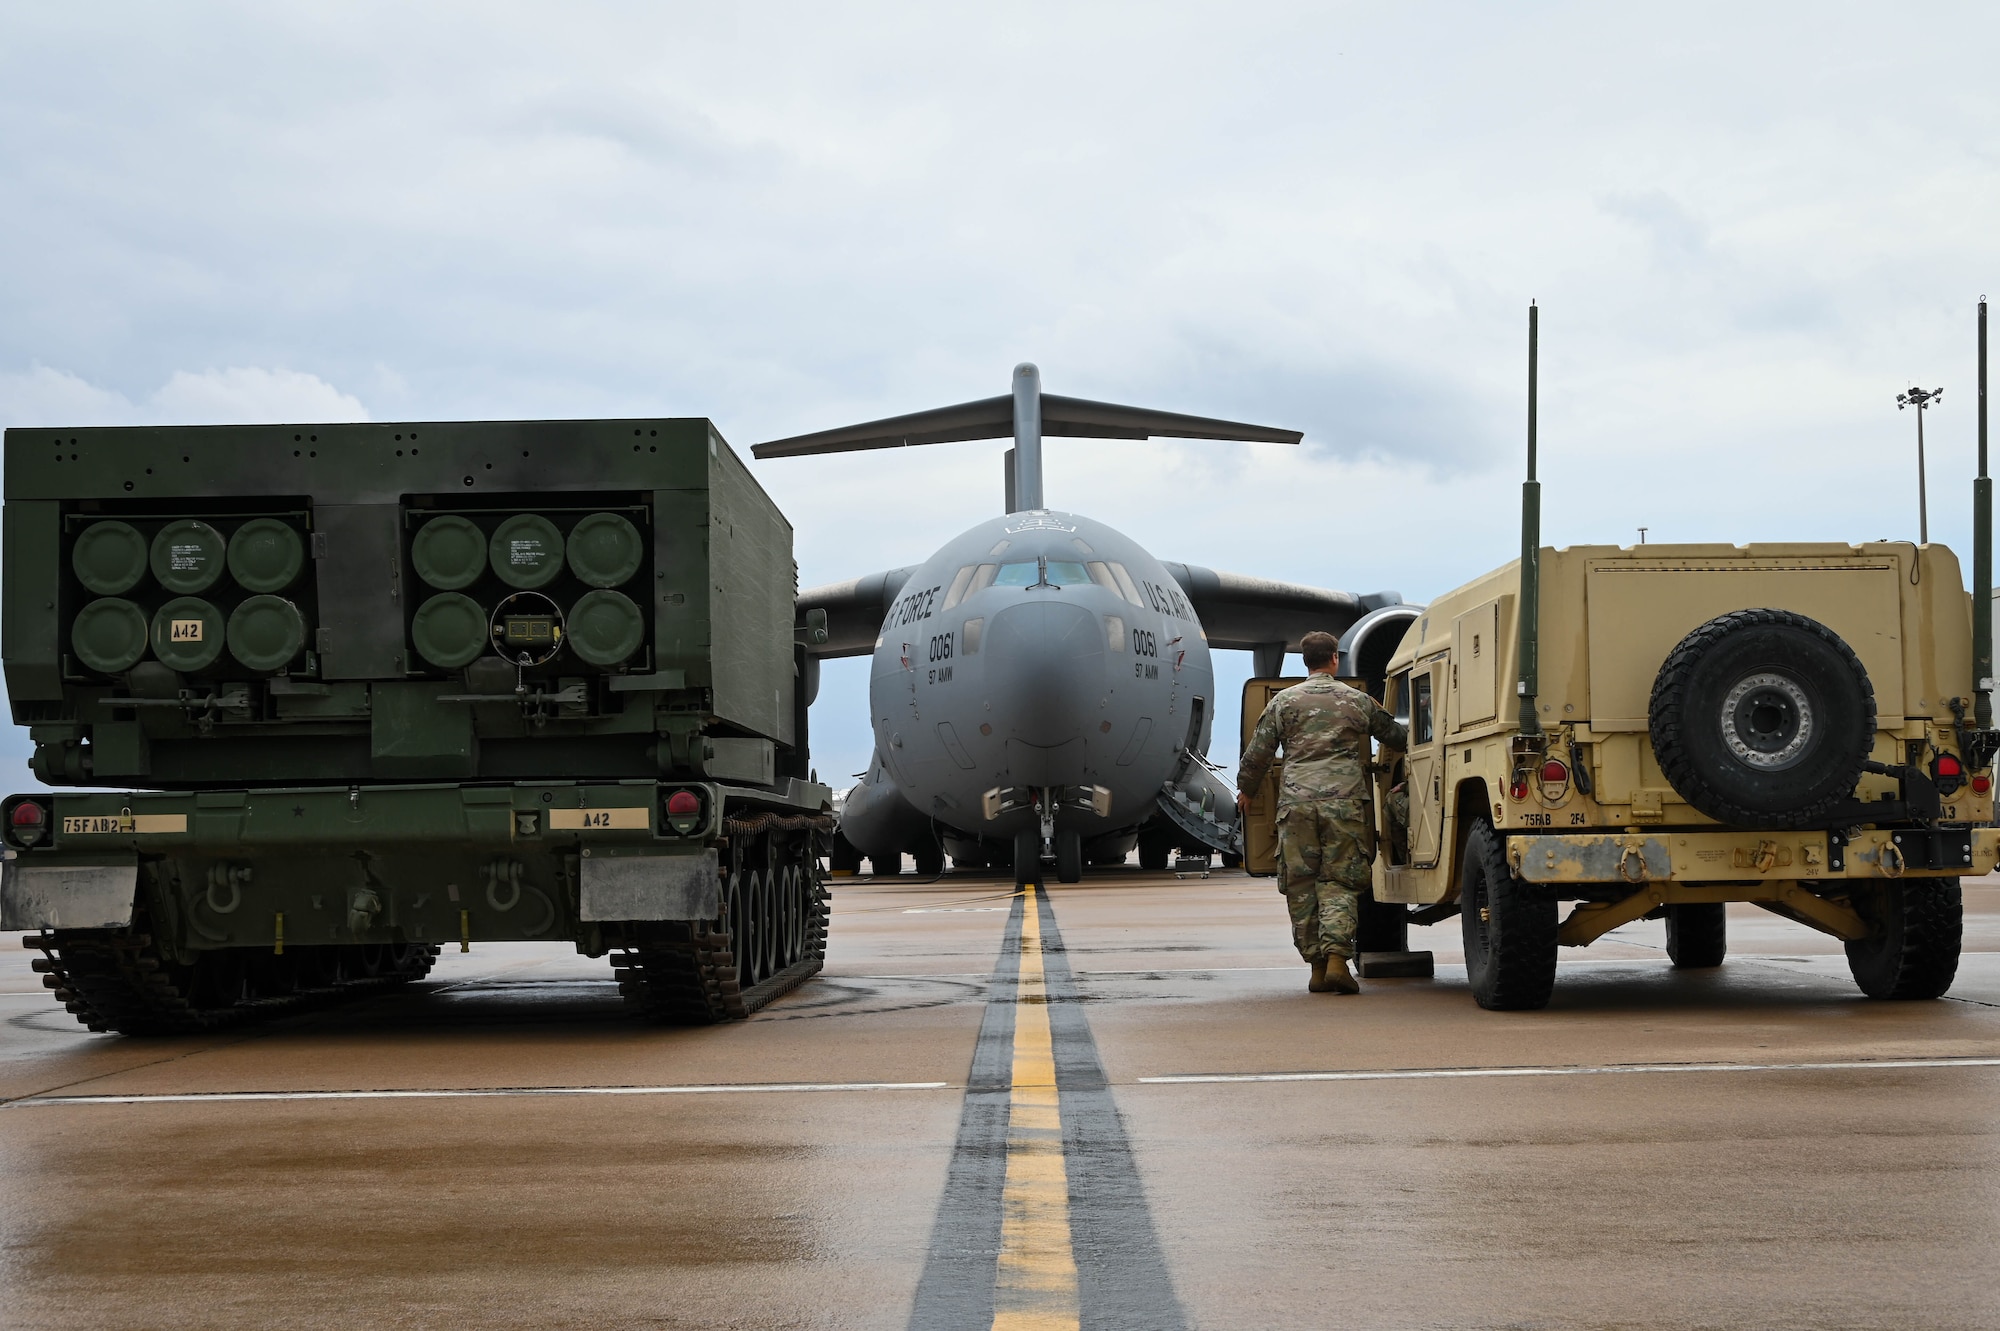 An M142 High Mobility Artillery Rocket System (HIMARS) and humvee park outside a C-17 Globemaster III at Altus Air Force Base, Oklahoma, May 25, 2022. The HIMARS carries six rockets or one large missile in a five-ton truck, and can launch the entire Multiple Launch Rocket System Family of Munitions which includes more than 10 different types of rockets. (U.S. Air Force photo by Senior Airman Kayla Christenson)